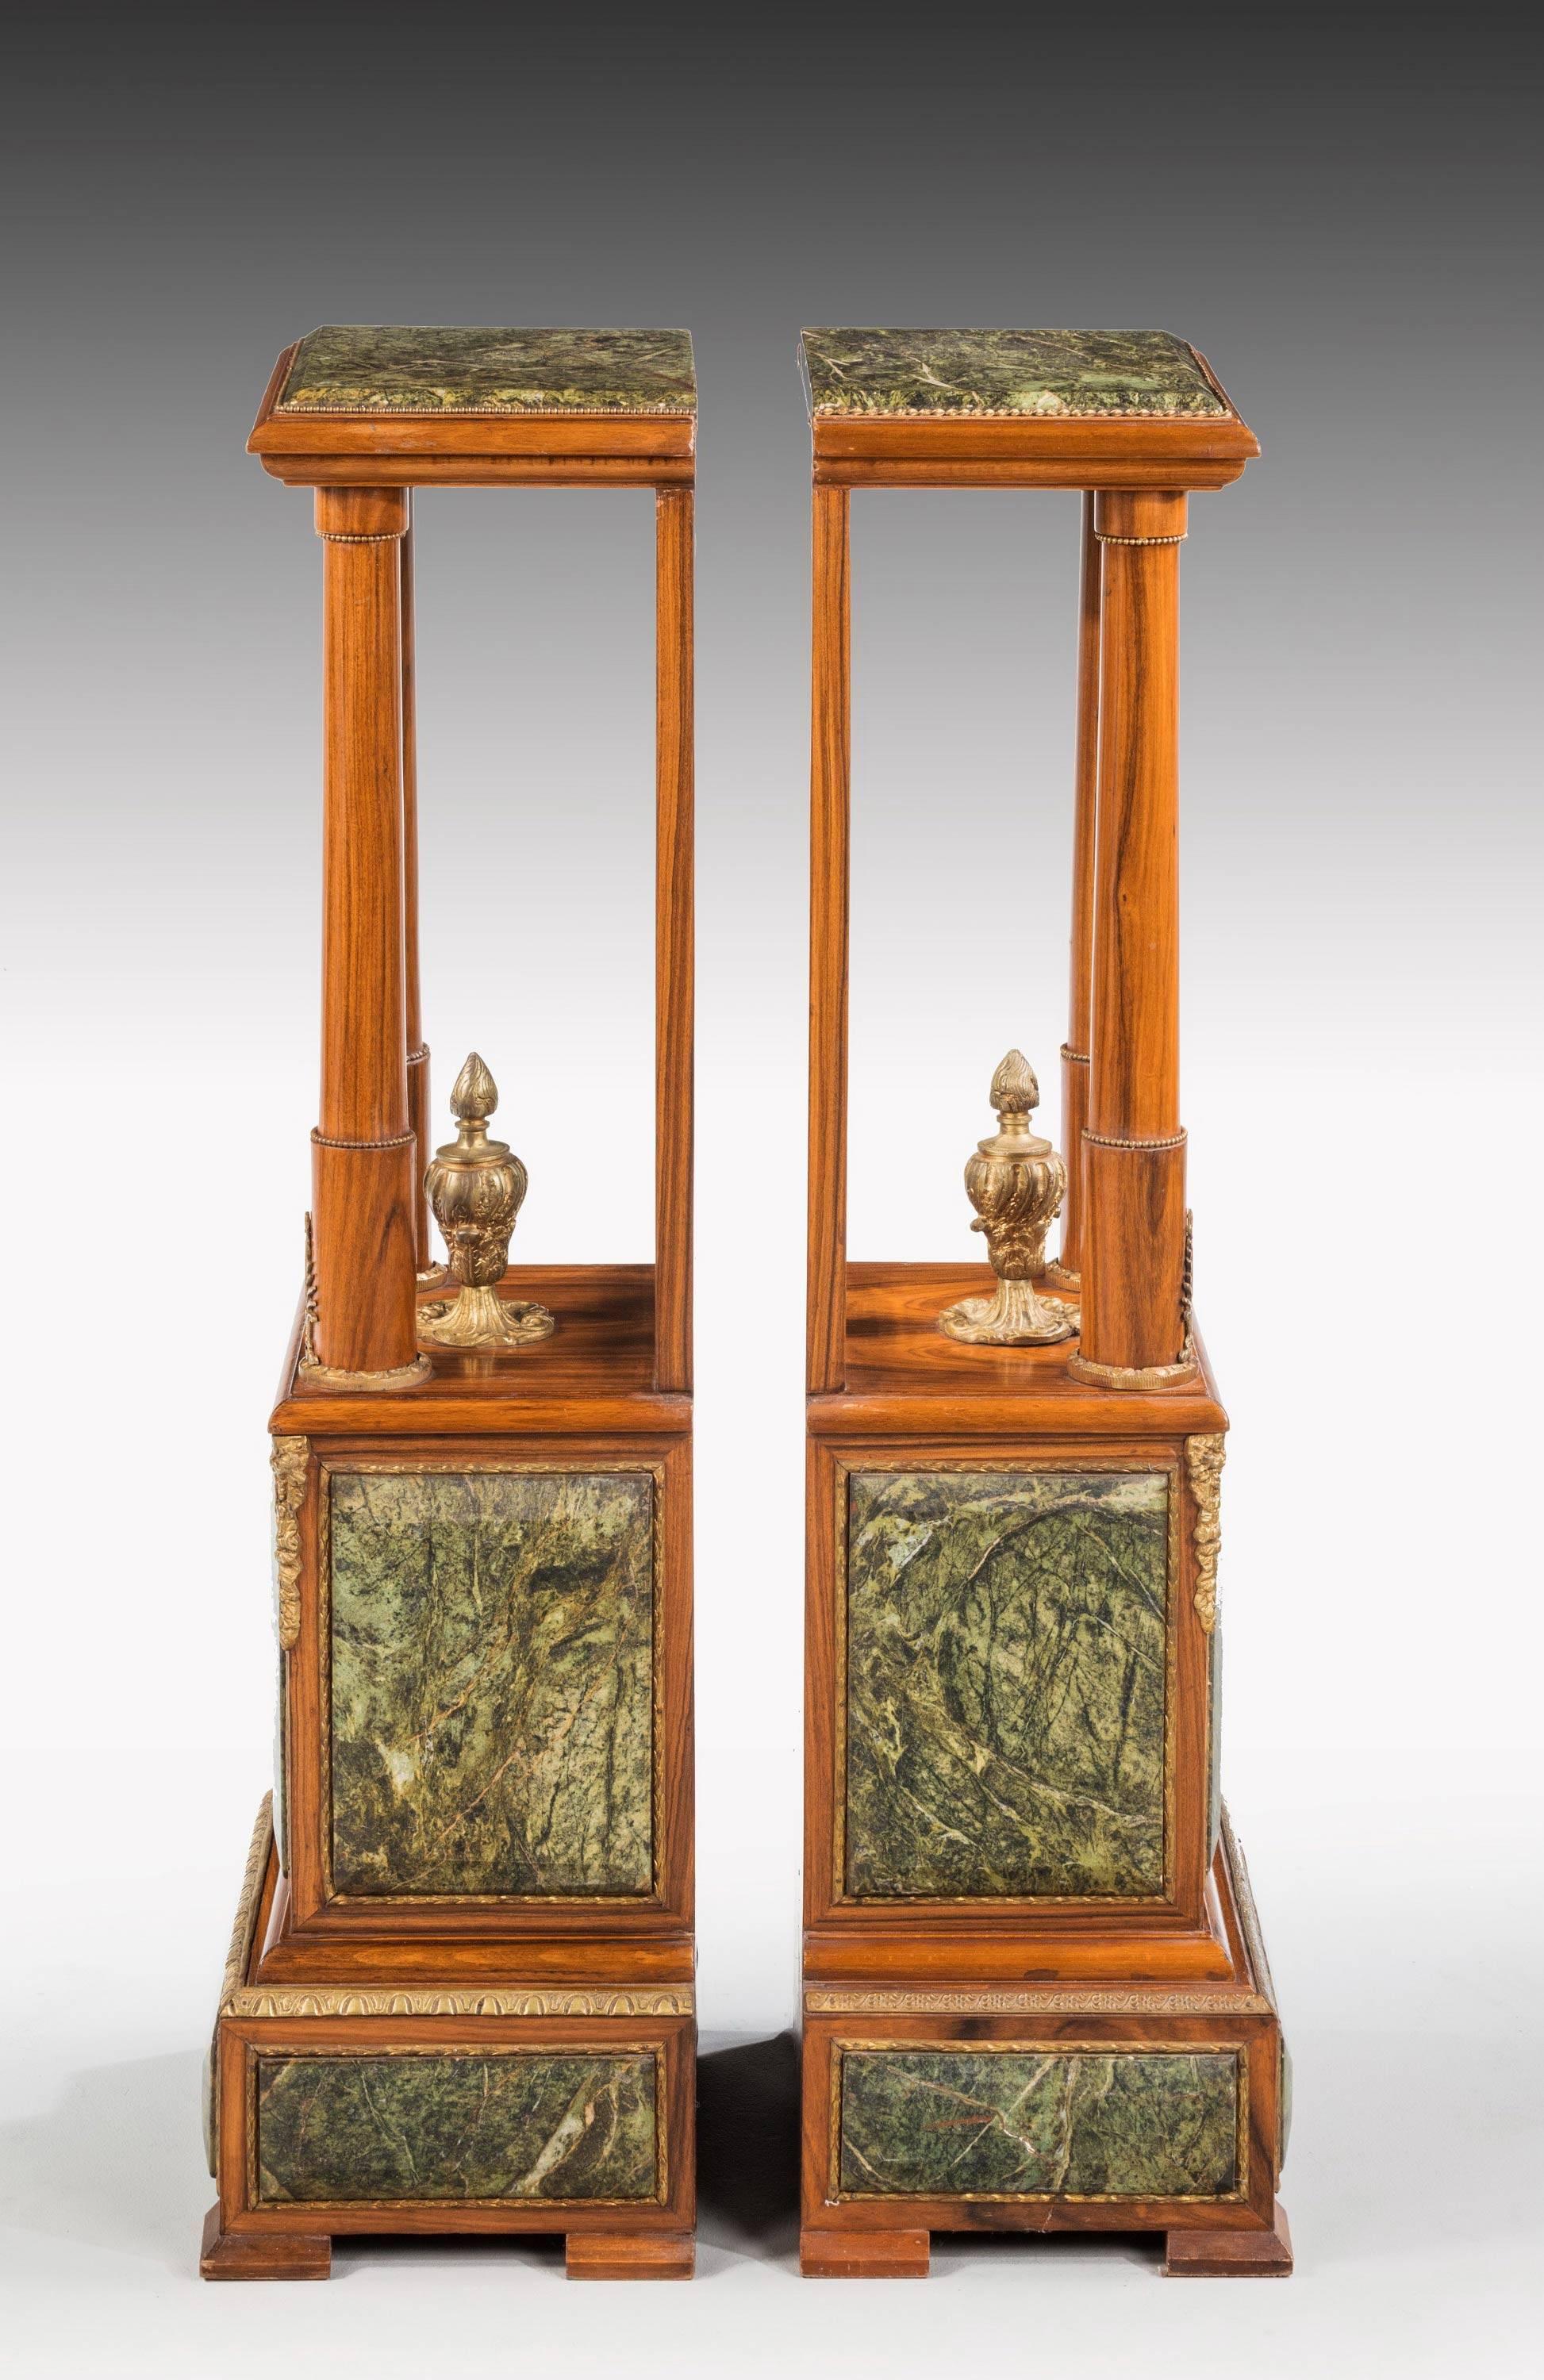 A most unusual pair of Louis XVI style hardwood and serpentine marble mounted stands. Complex construction. With good original gilt bronze mounts. 

N.